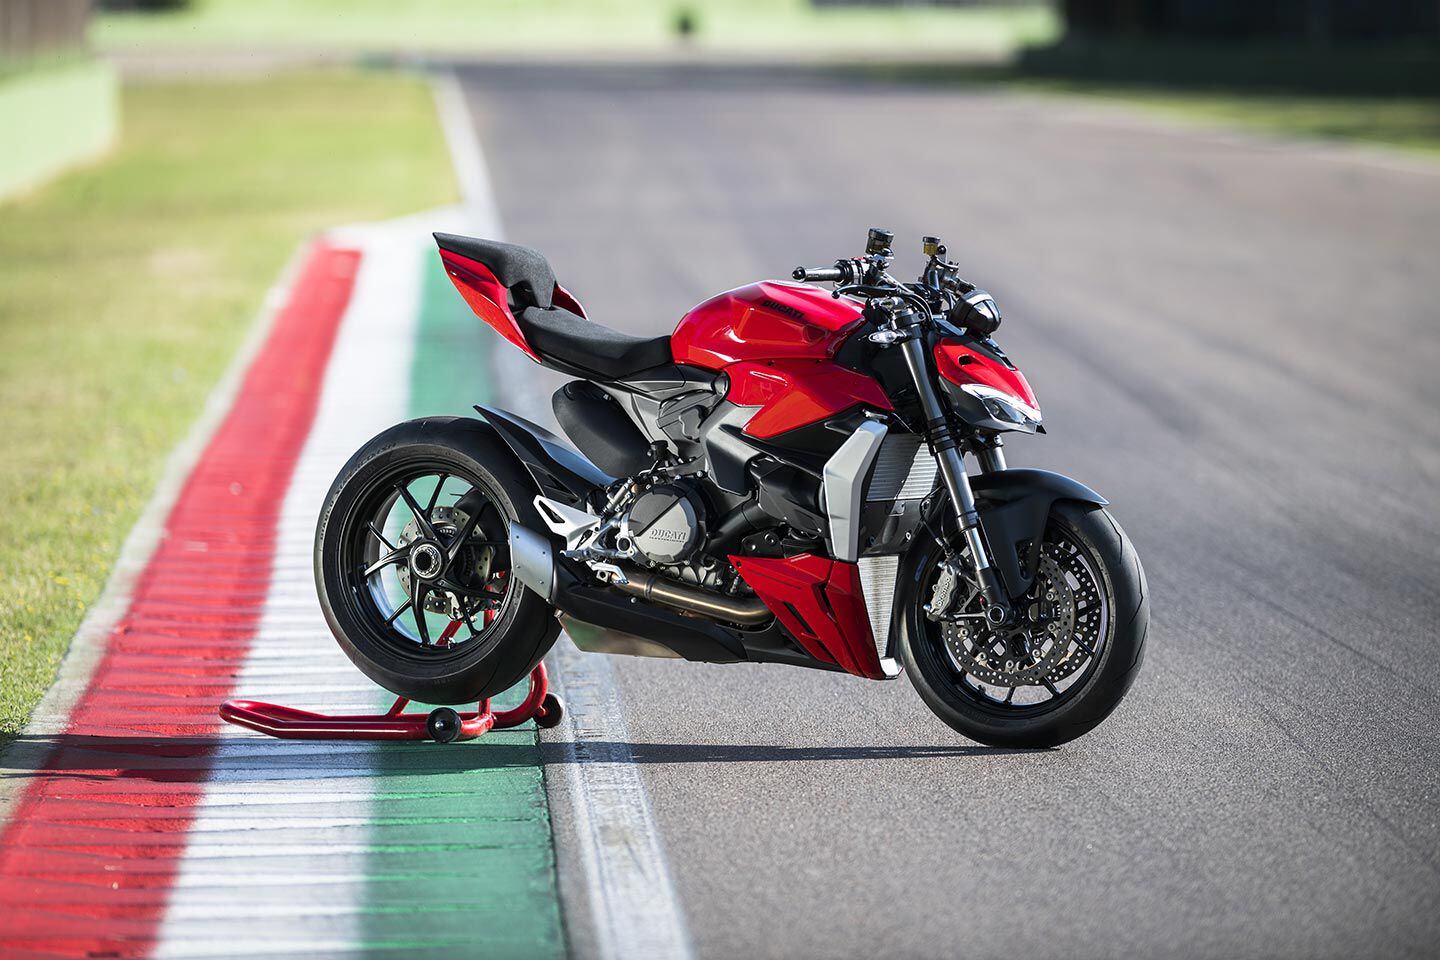 A 2022 Ducati Streetfighter V2, shown here awaiting fun riding and/or activities.